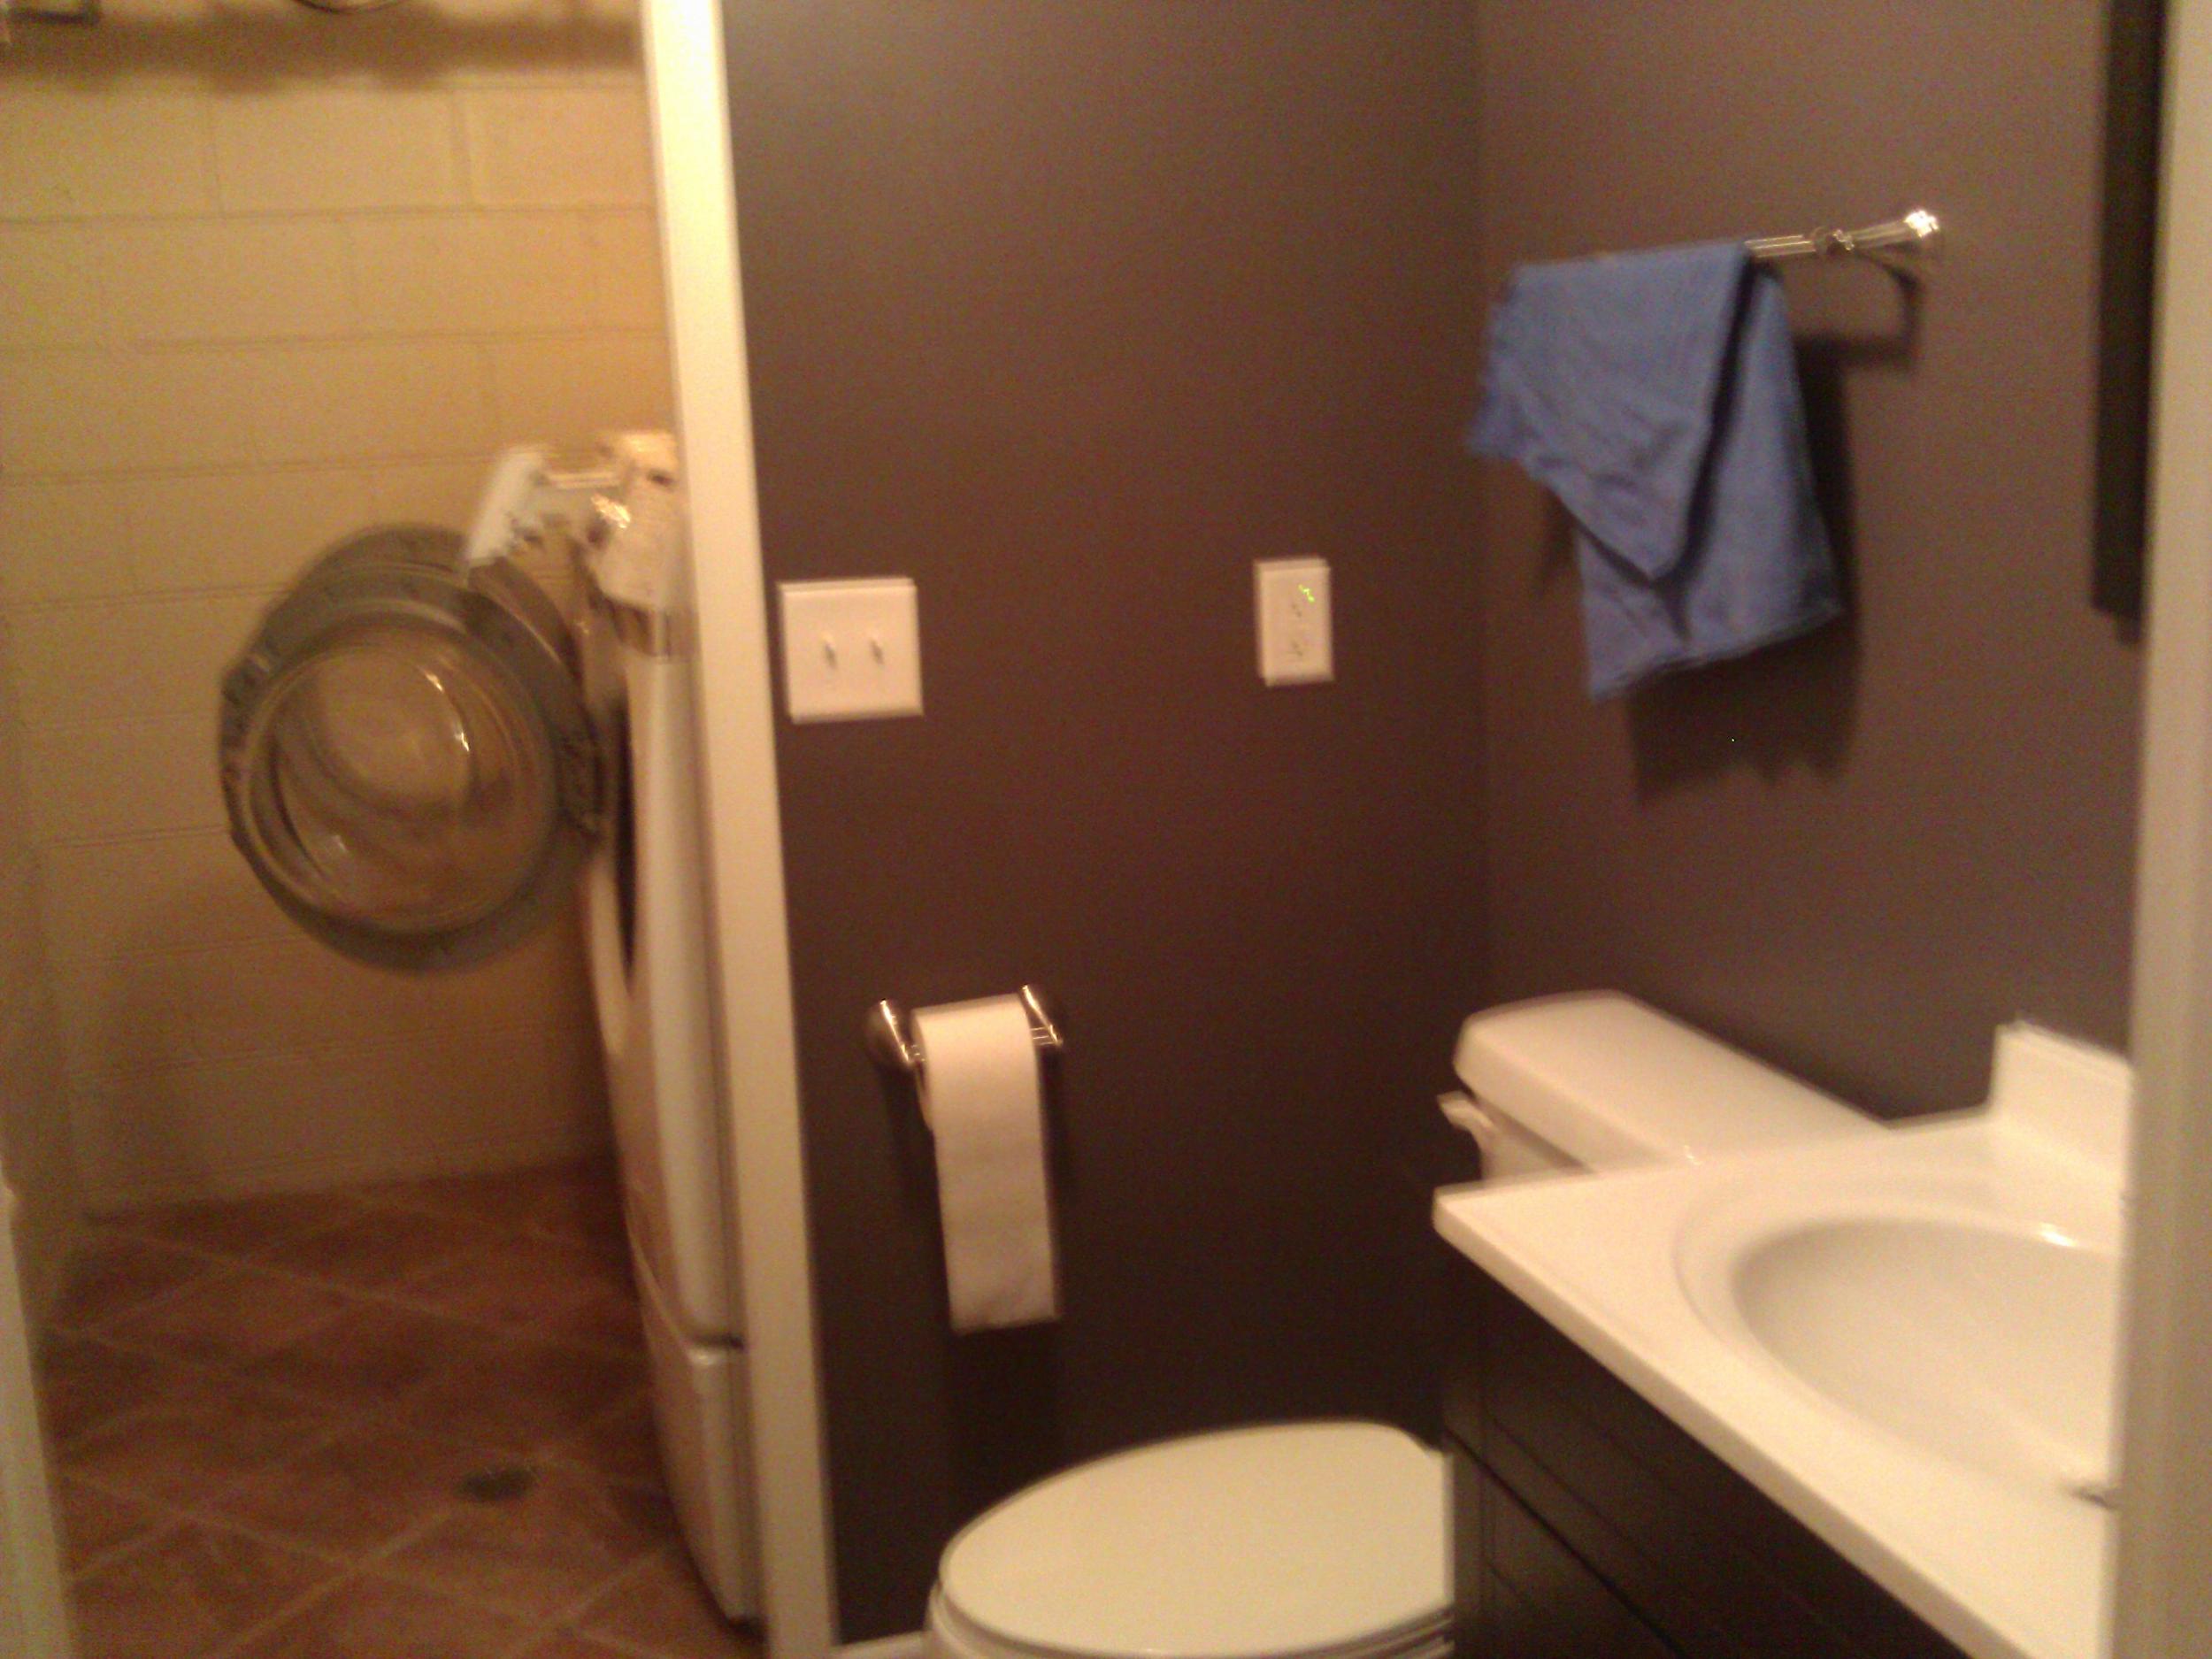 The basement bathroom and laundry room, which are immediately inside the basement garage door.